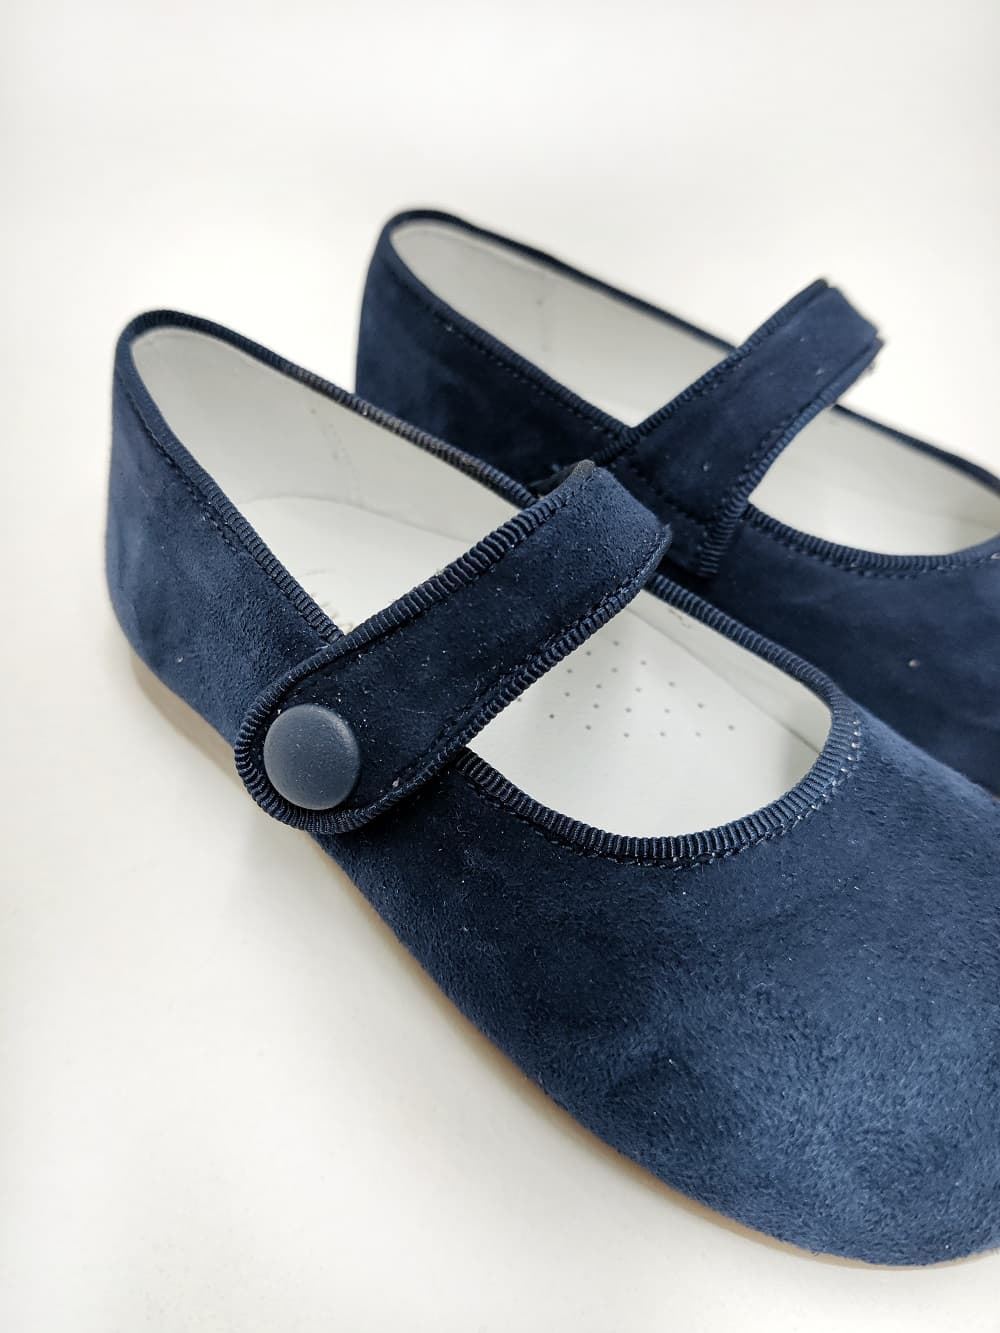 Pirufin Mary Janes for baby girls in Navy Blue suede - Image 4